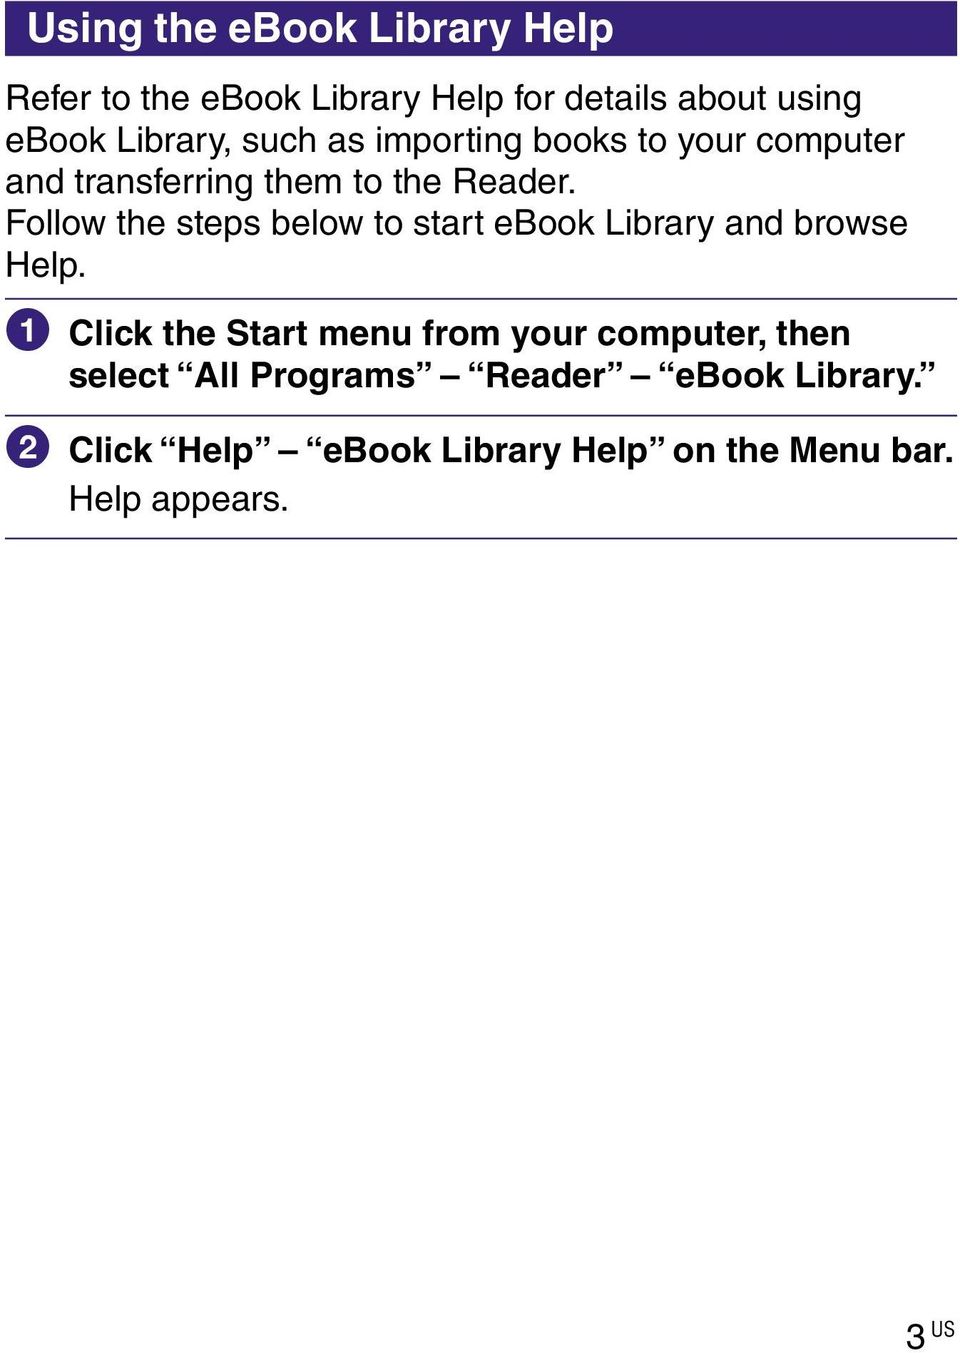 Follow the steps below to start ebook Library and browse Help.